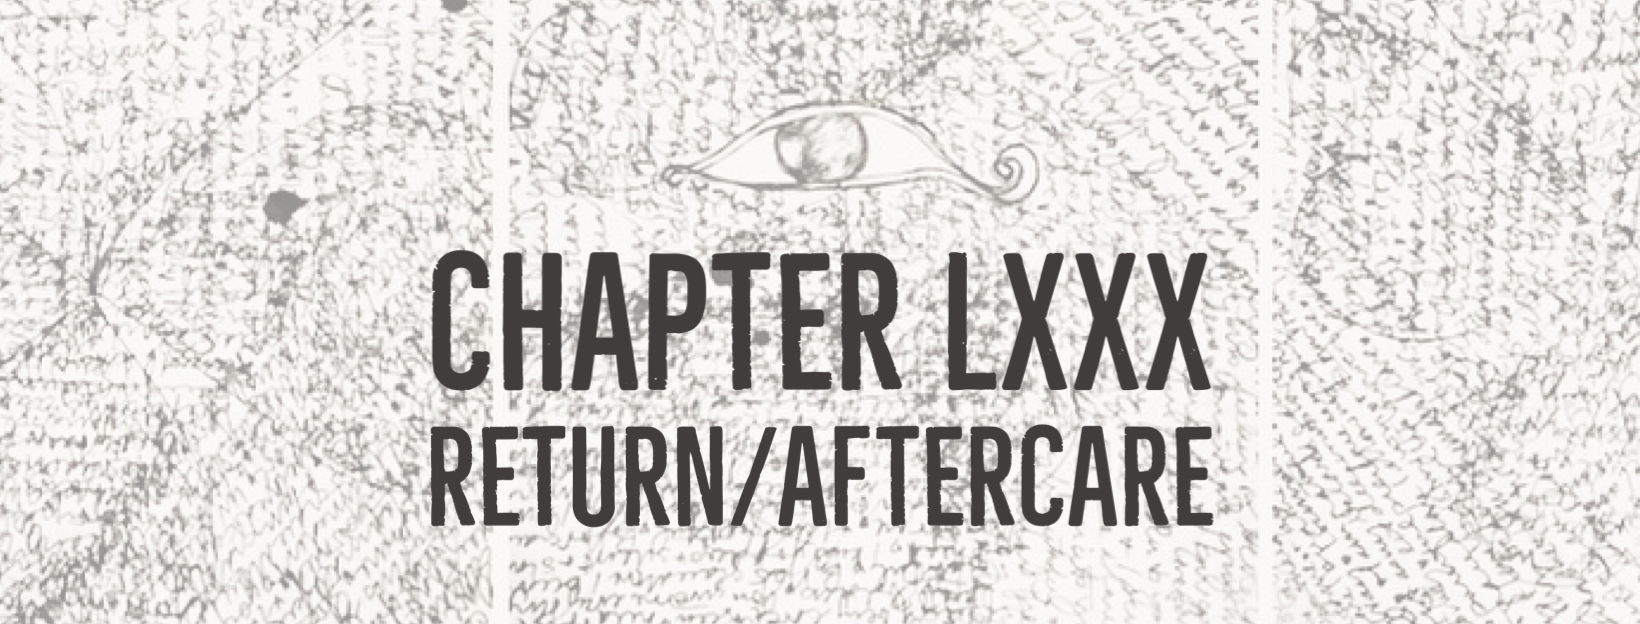 CHAPTER 80: RETURN/AFTERCARE